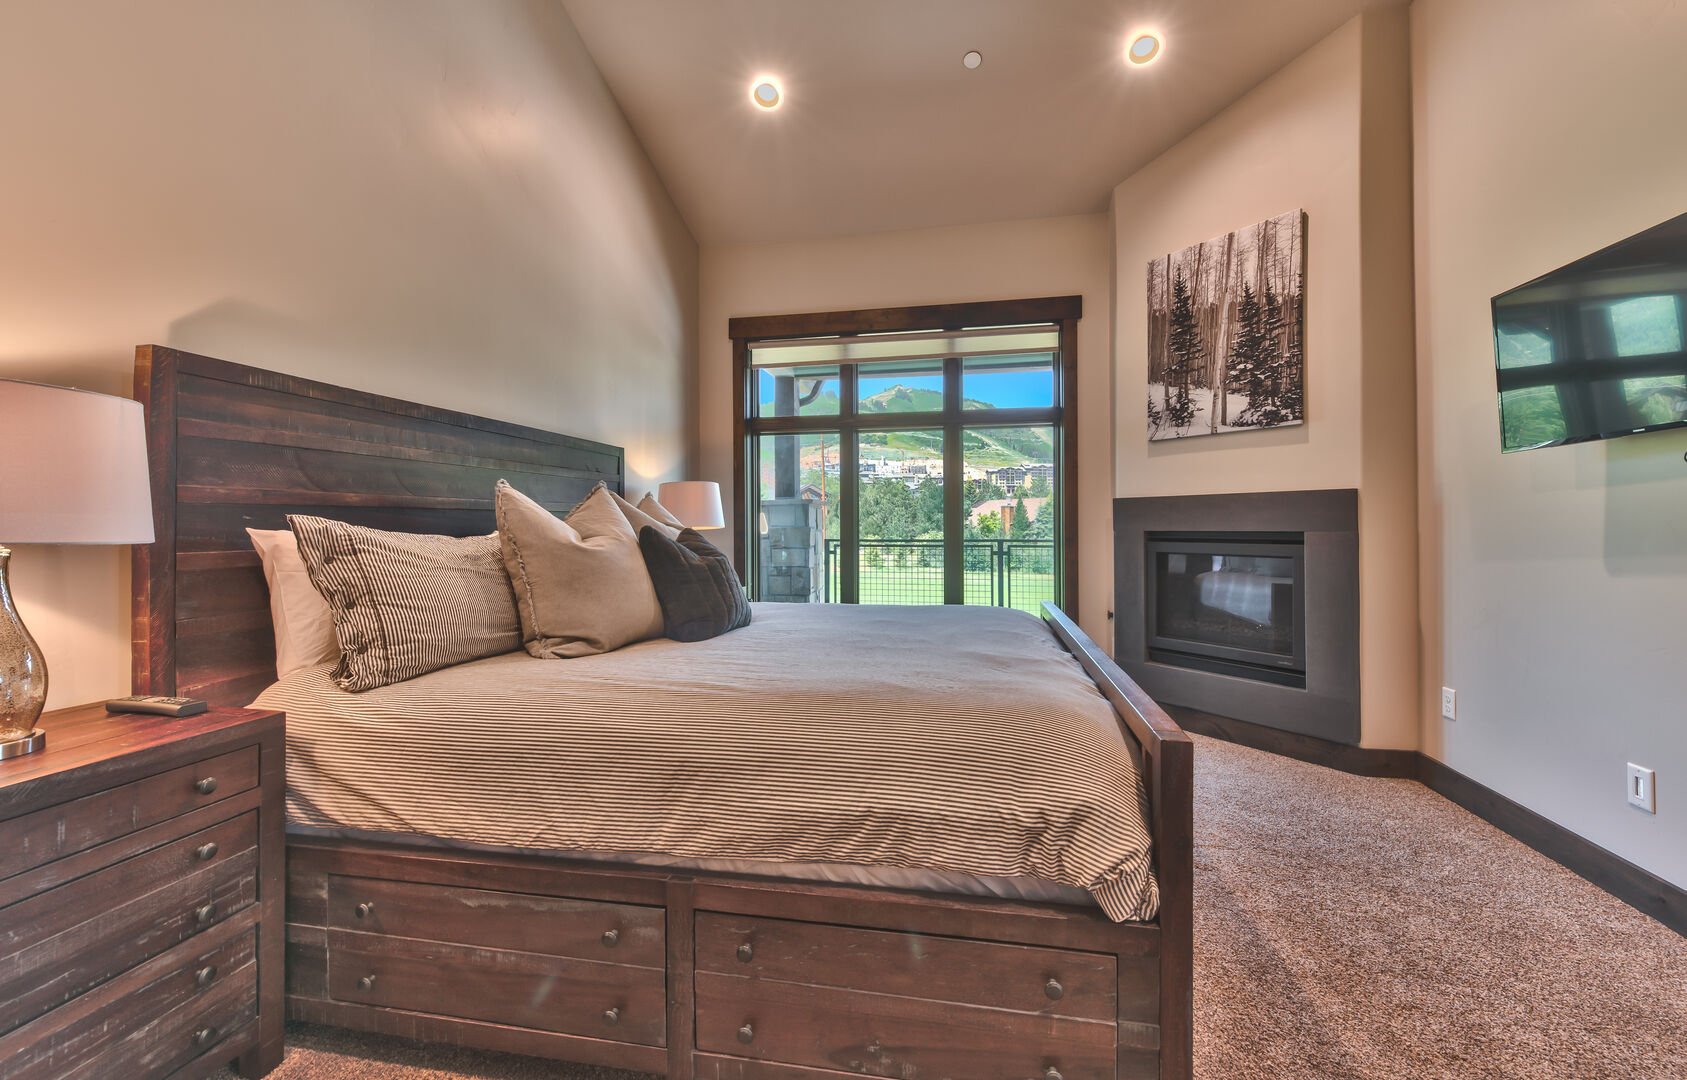 Enjoy views of the golf course and mountains from master bedroom, living room, dining, etc.